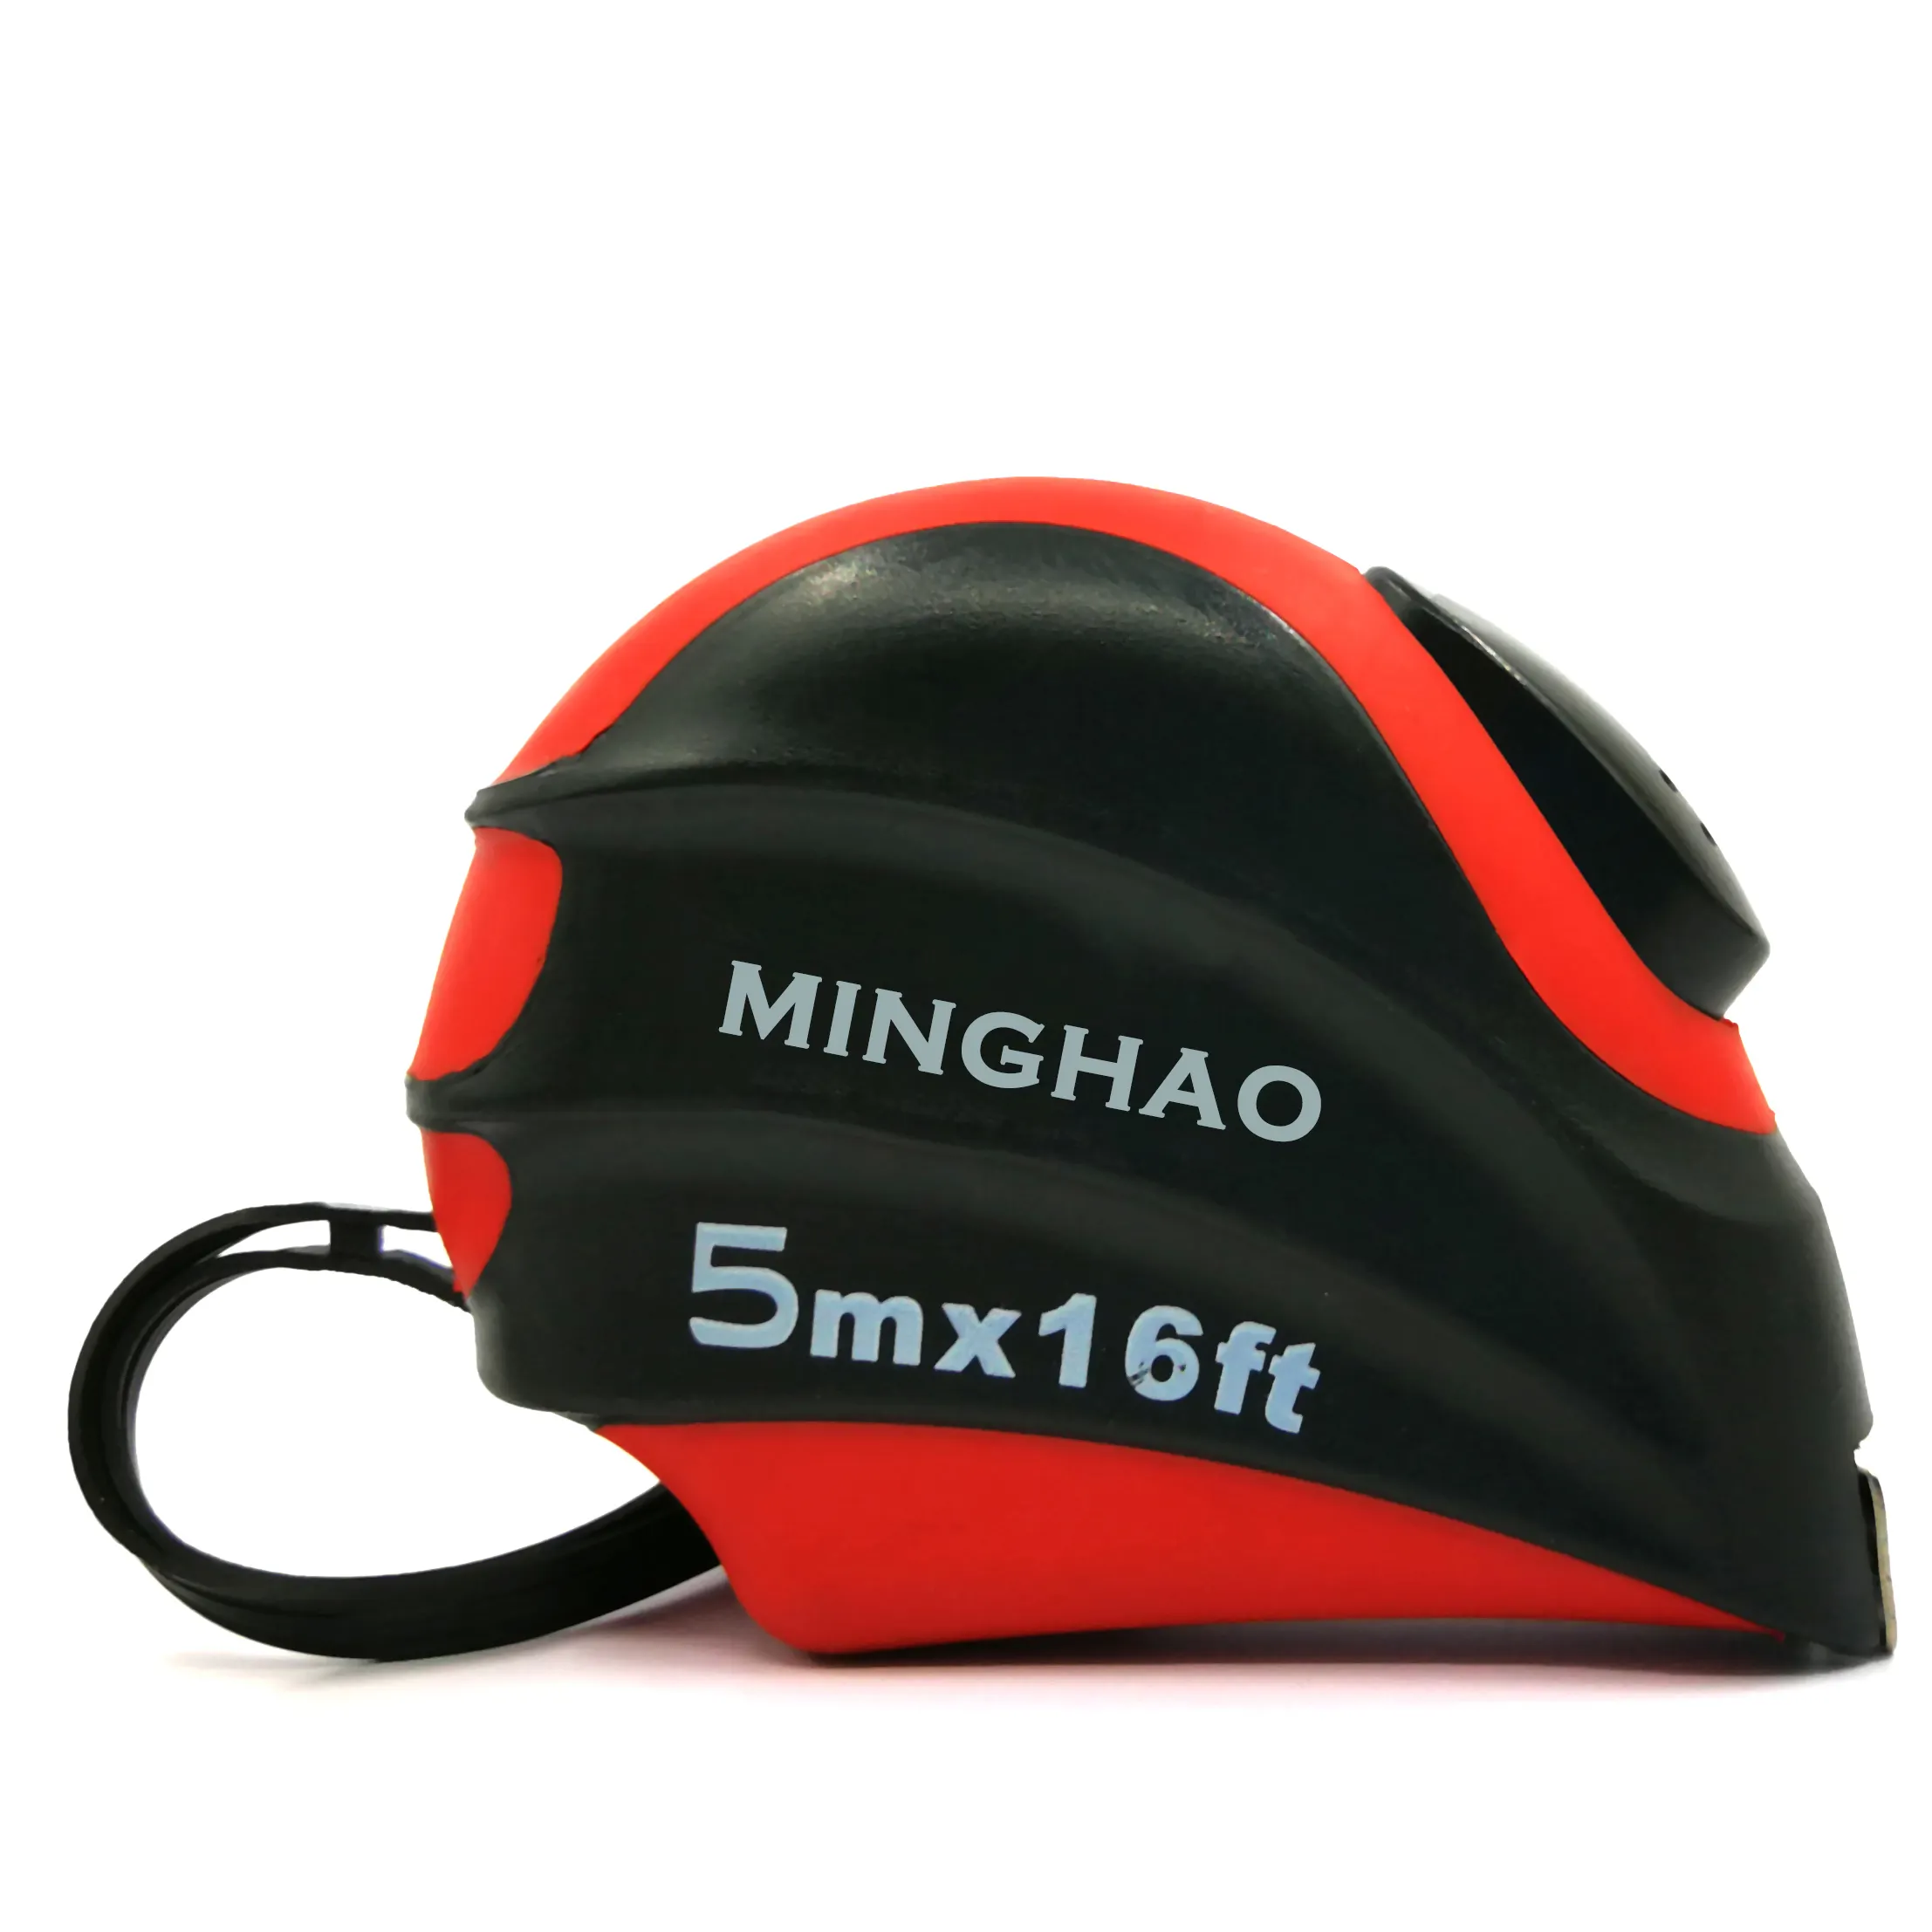 Top Qualtity cheap measuring tool,Cute body tape measure manufacture in YUCHENG wholesale or bulk